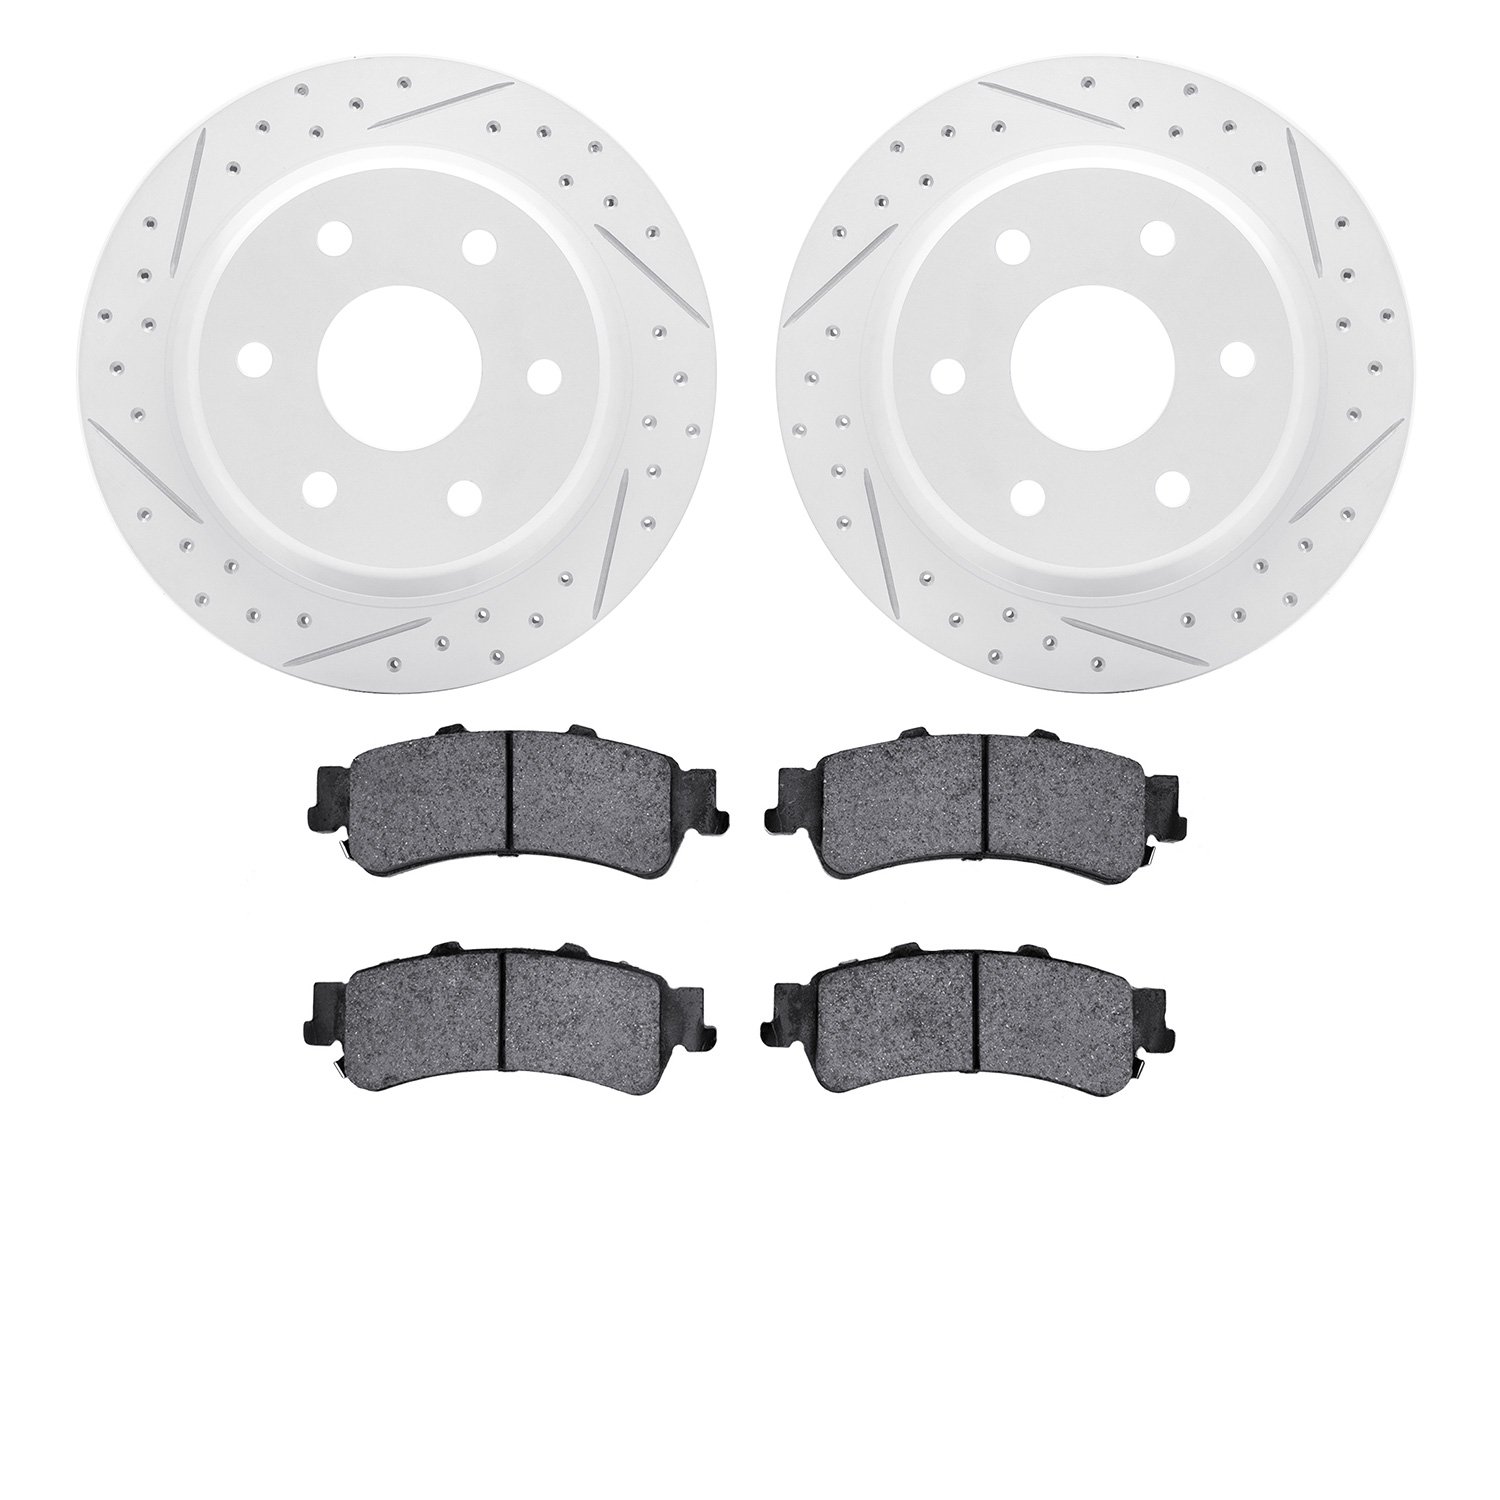 2502-48042 Geoperformance Drilled/Slotted Rotors w/5000 Advanced Brake Pads Kit, 1999-2007 GM, Position: Rear